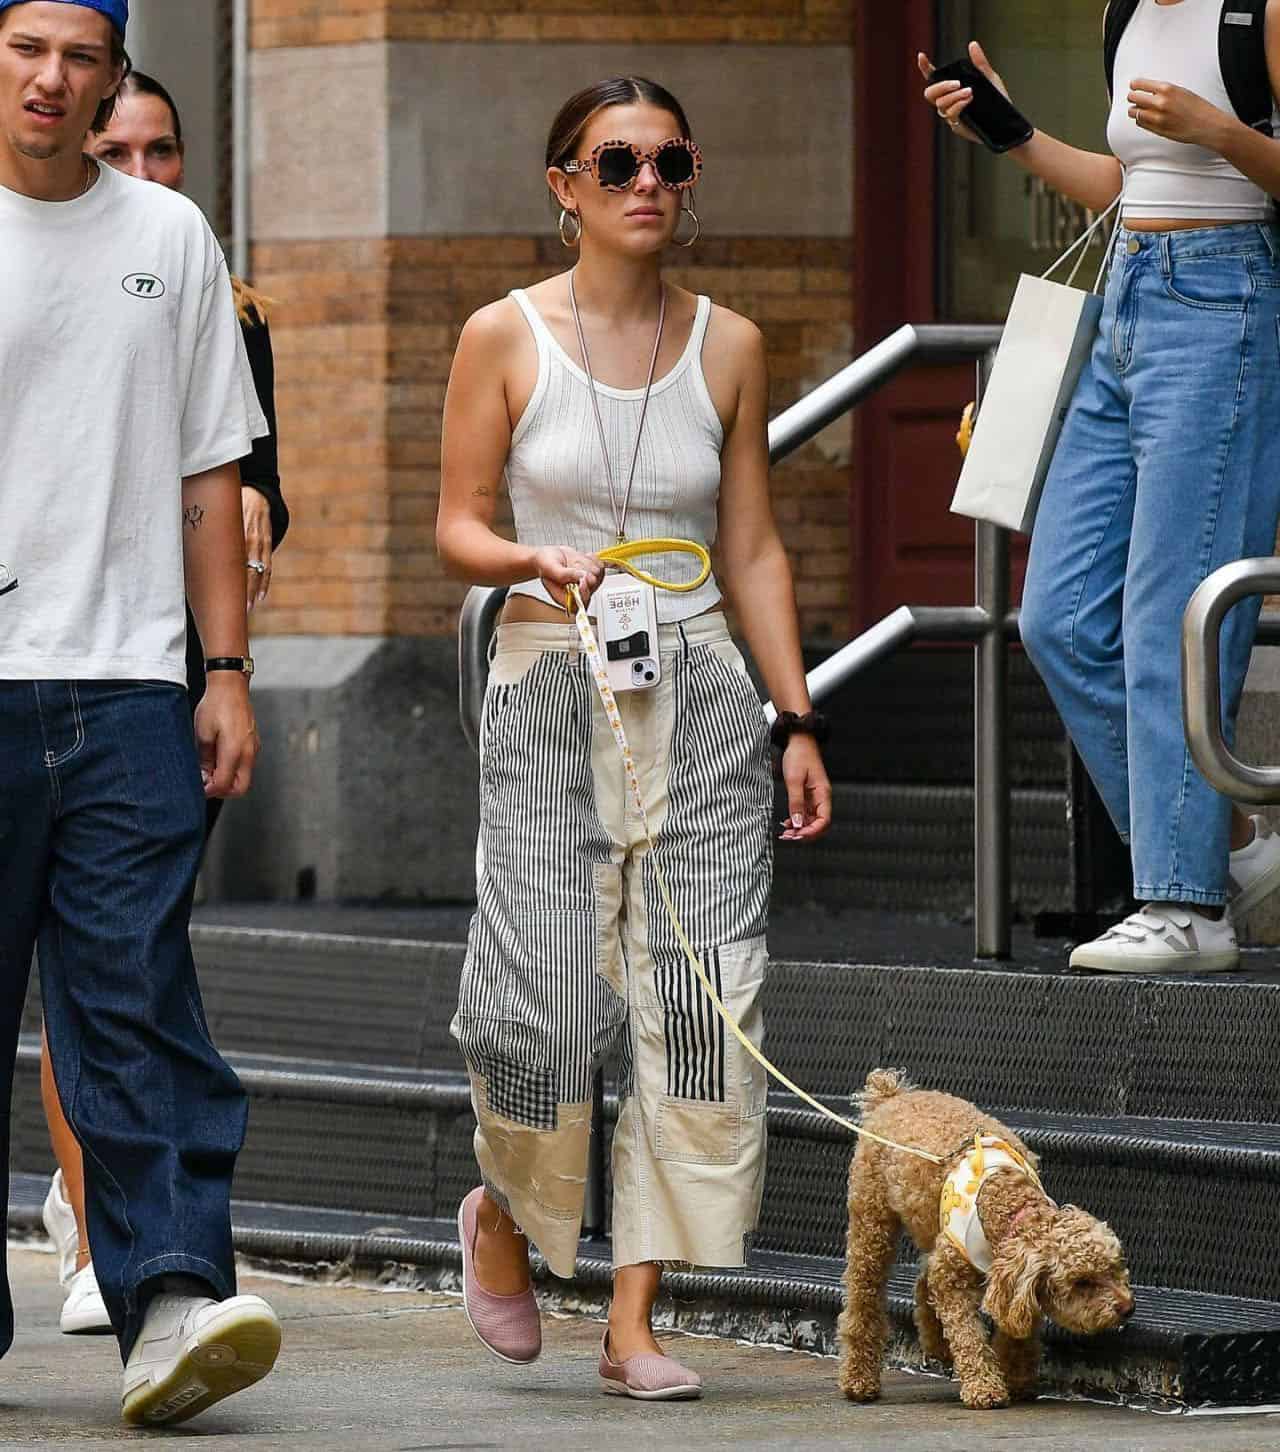 Millie Bobby Brown and Jake Bongiovi Take Her Dog for a Walk in NYC